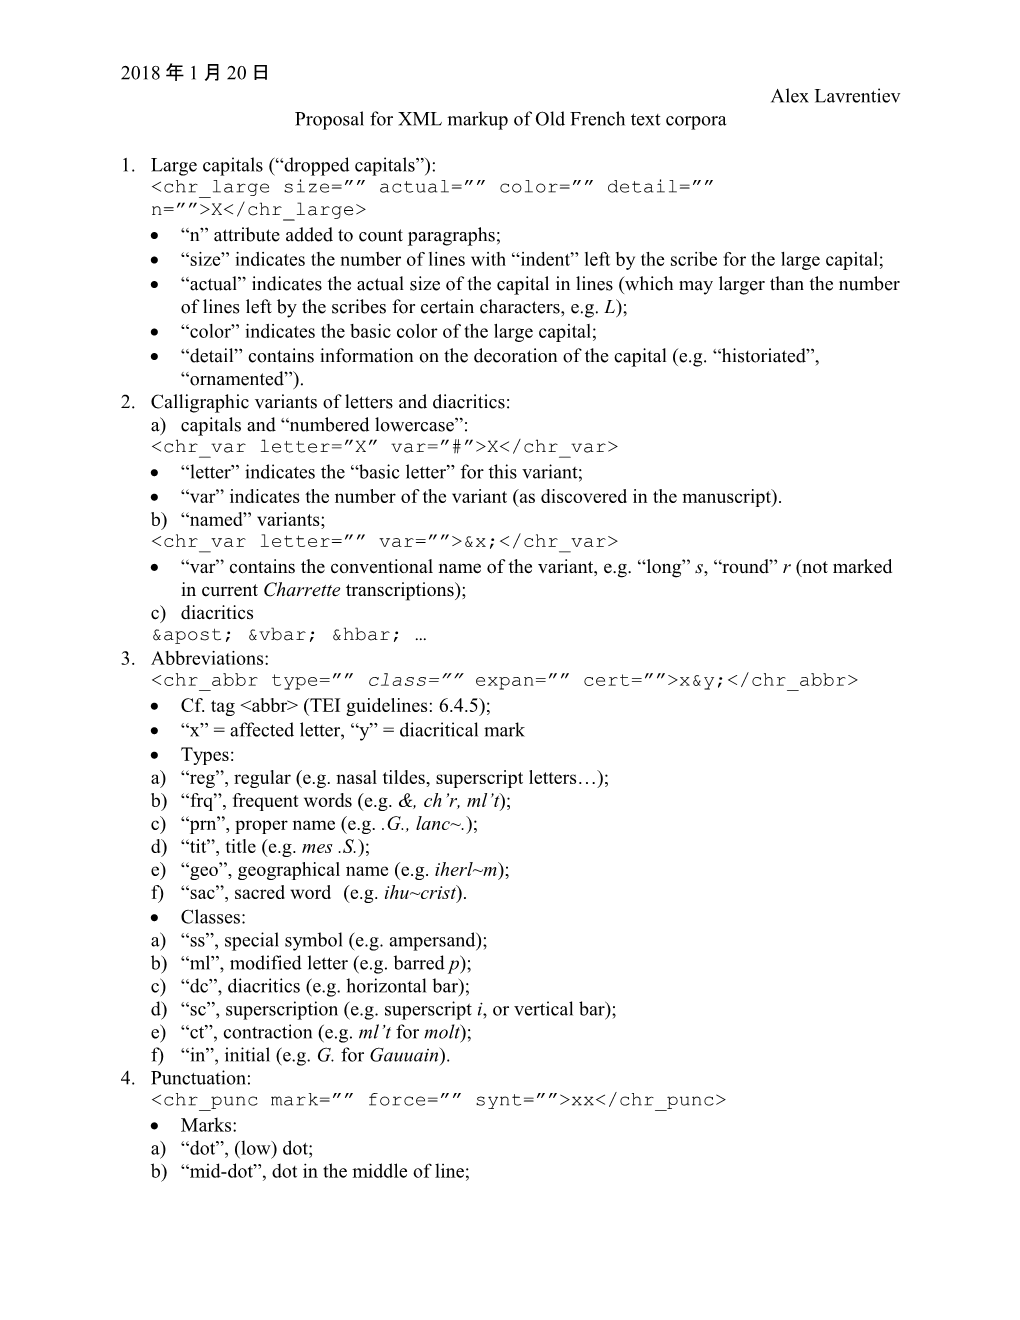 Proposal for XML Markup of Old French Text Corpora